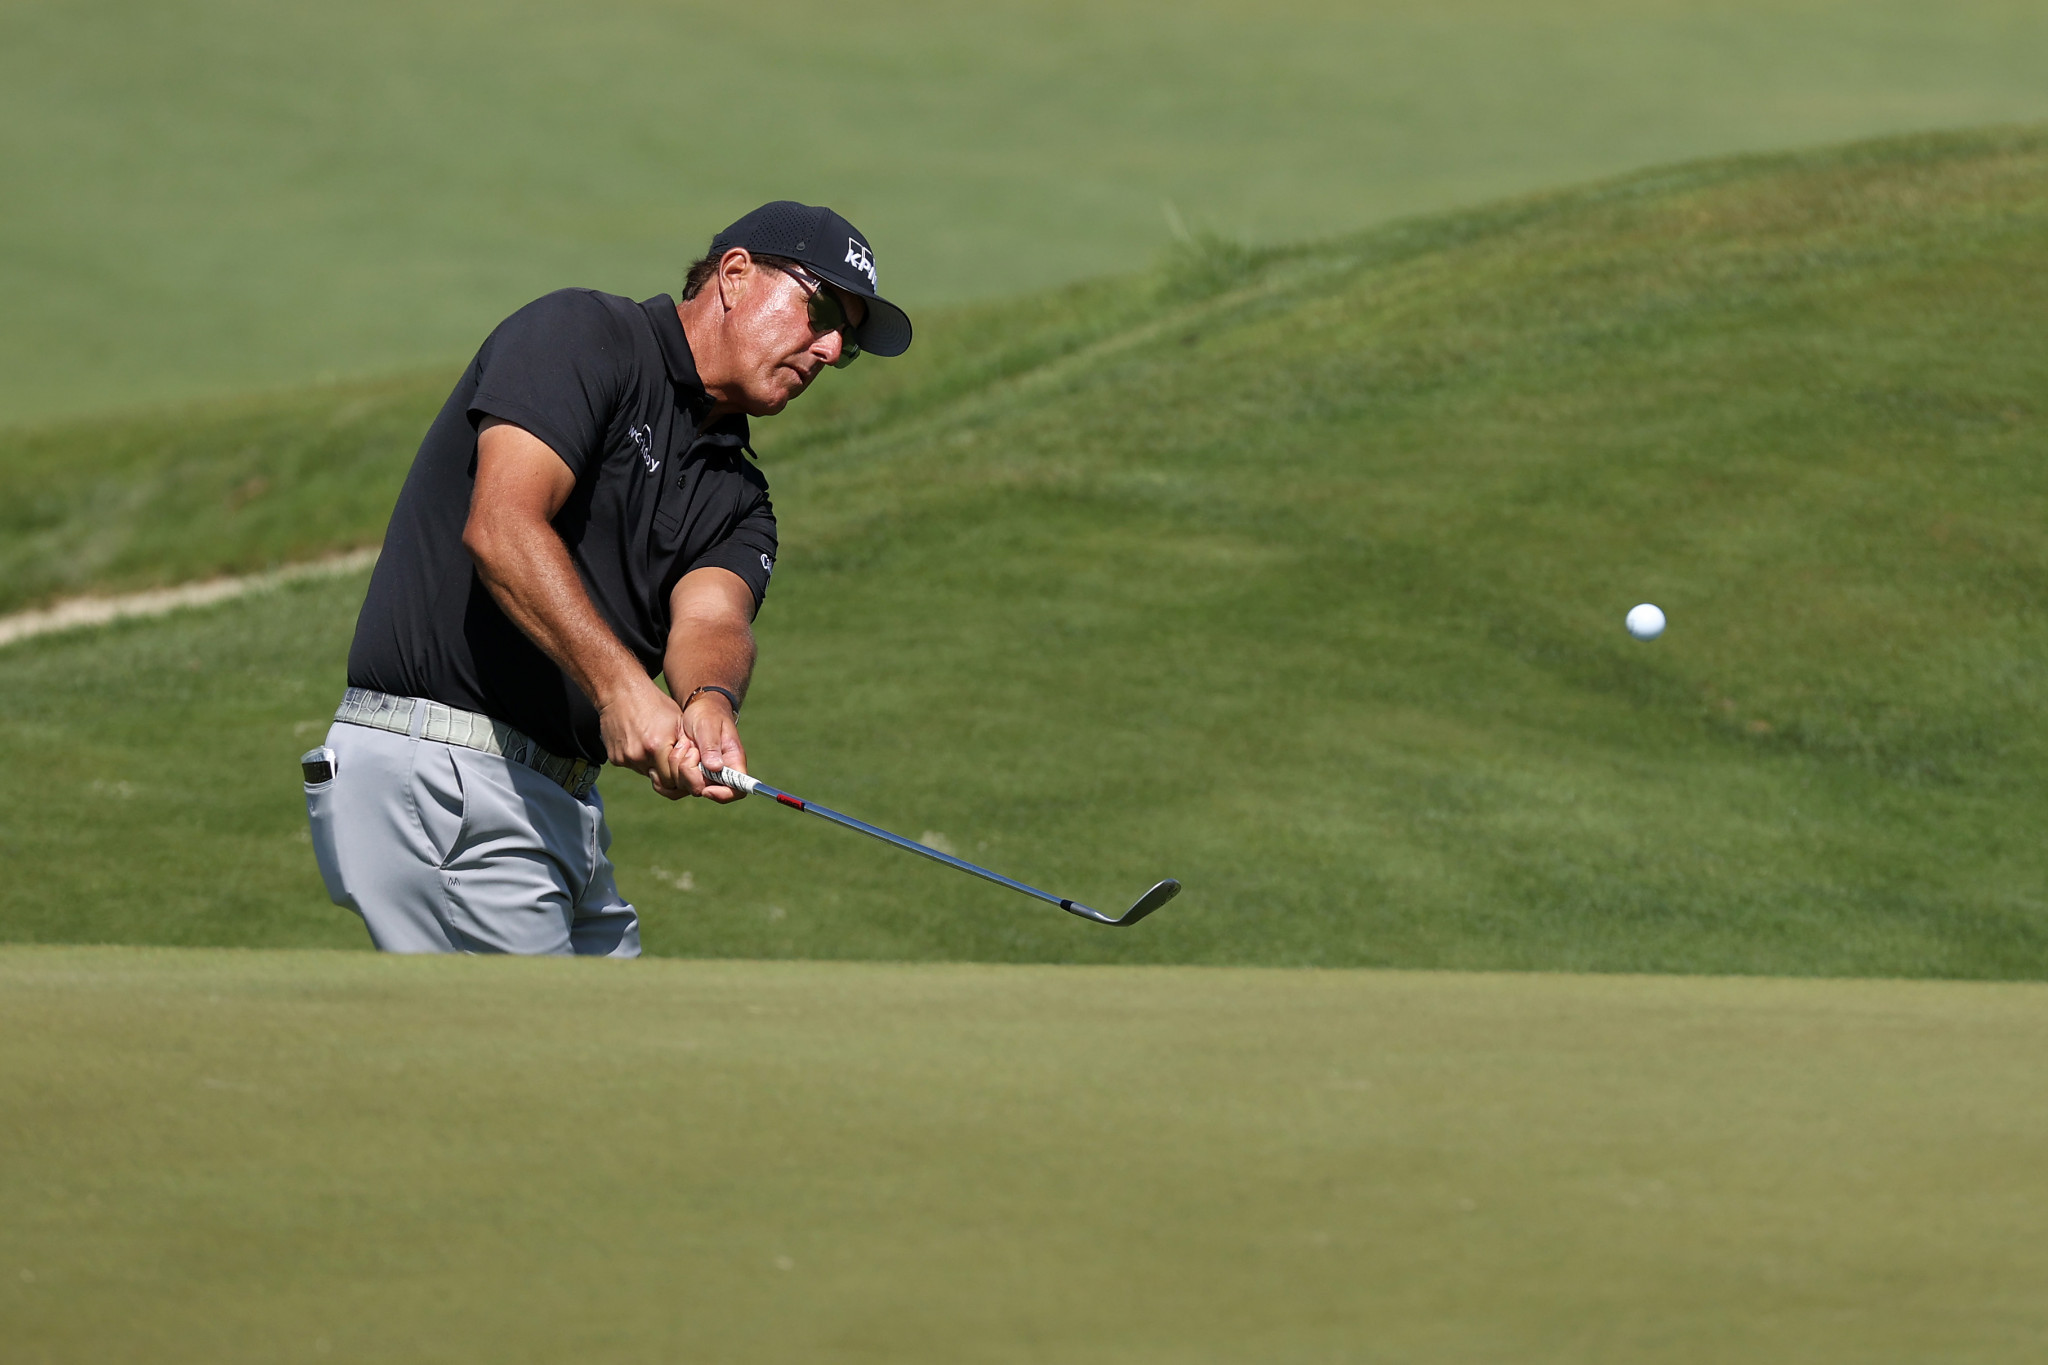 Phil Mickelson made five birdies in his last nine holes to move into a share of the 36-hole lead at the PGA Championship ©Getty Images